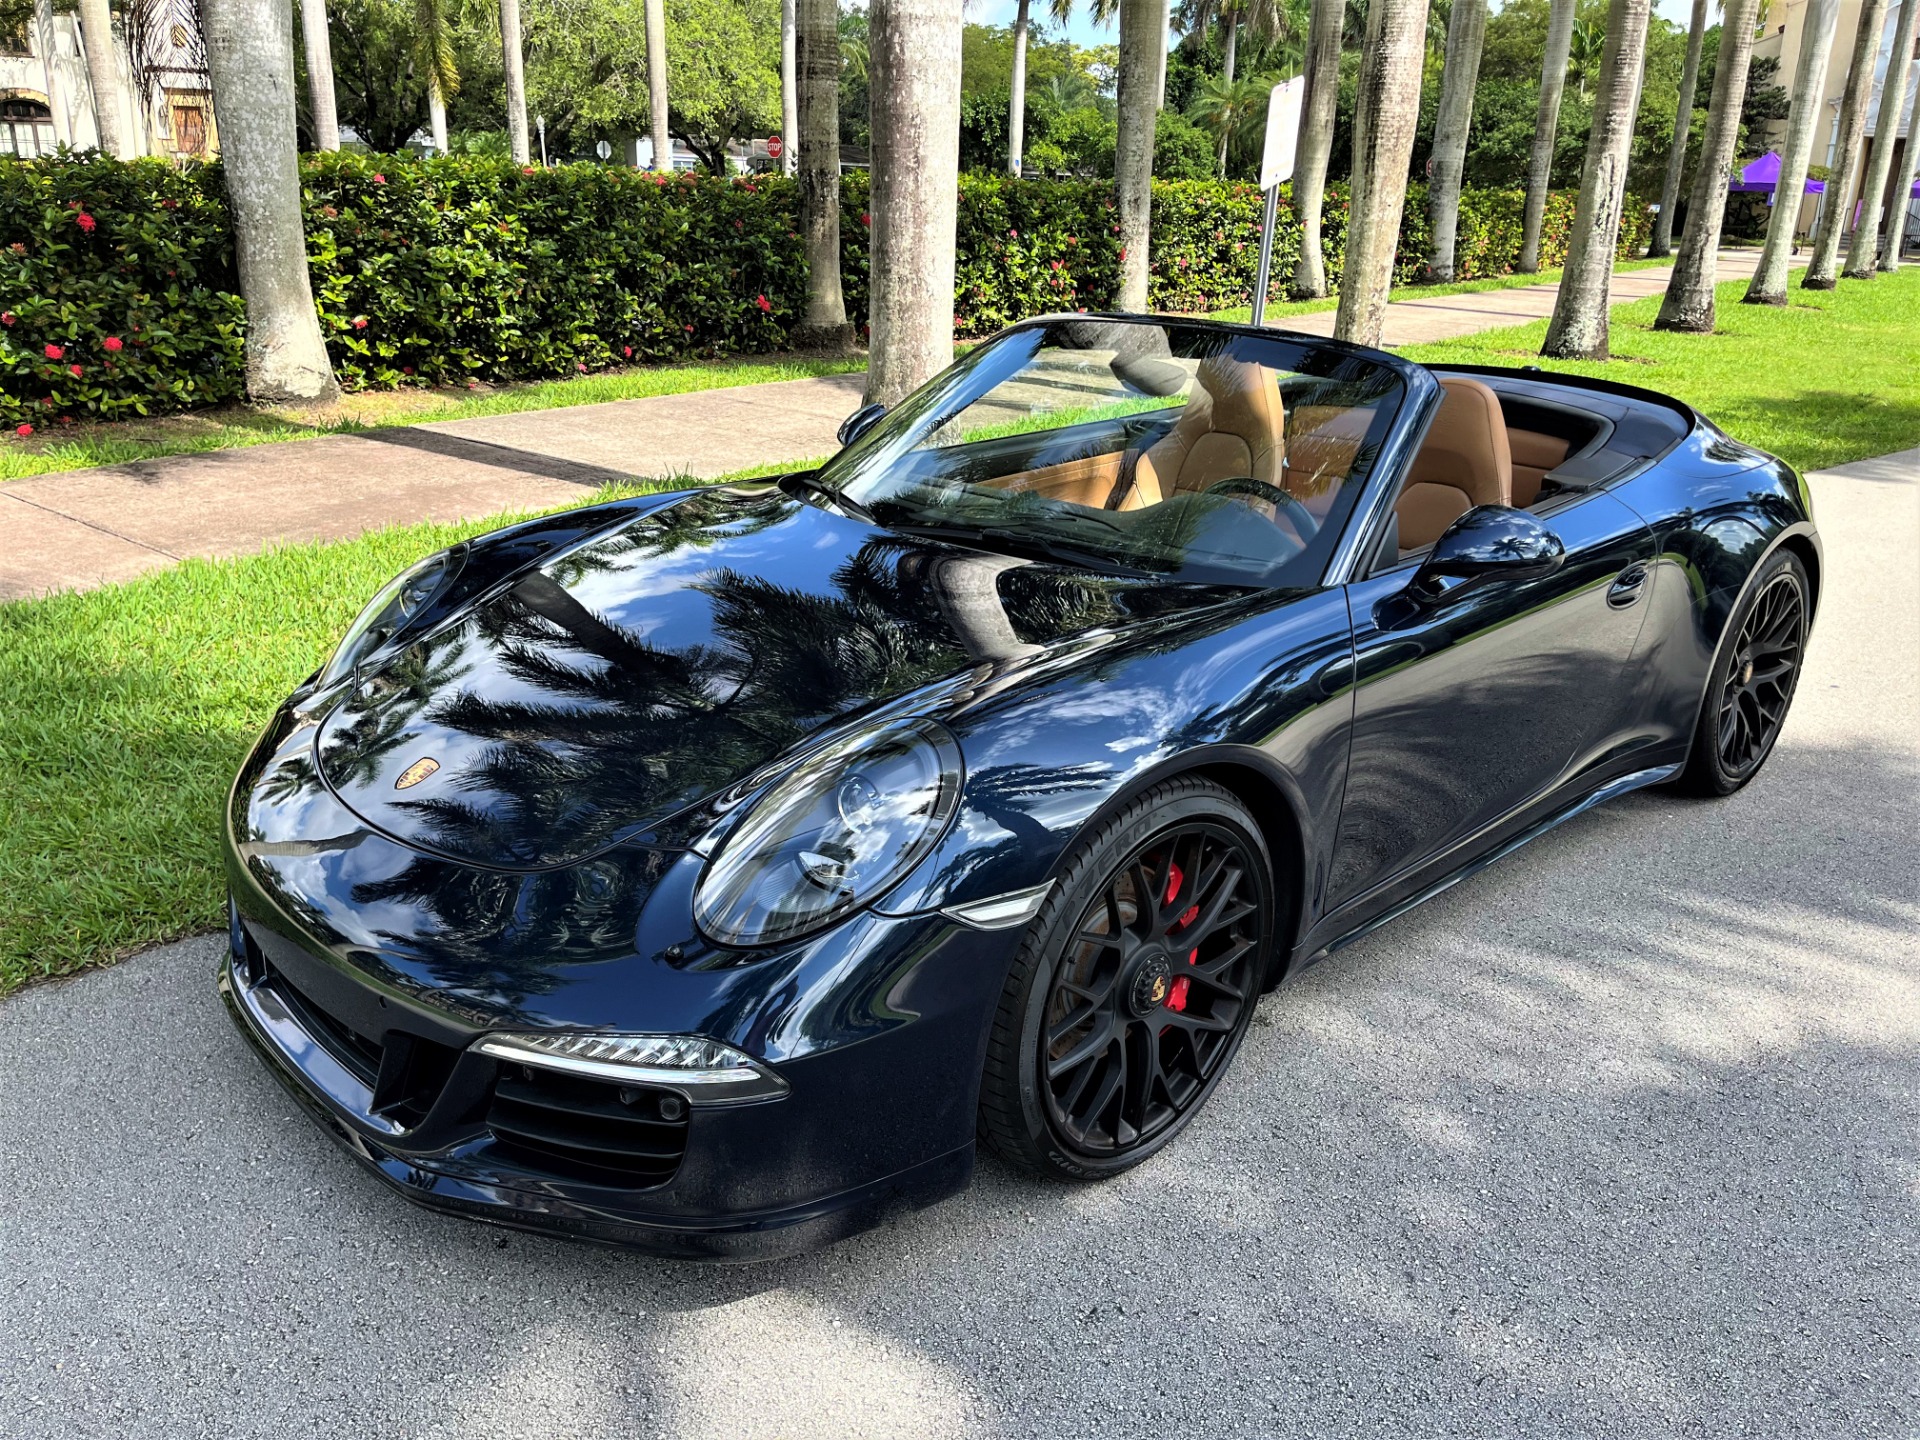 Used 2015 Porsche 911 Carrera GTS for sale Sold at The Gables Sports Cars in Miami FL 33146 3